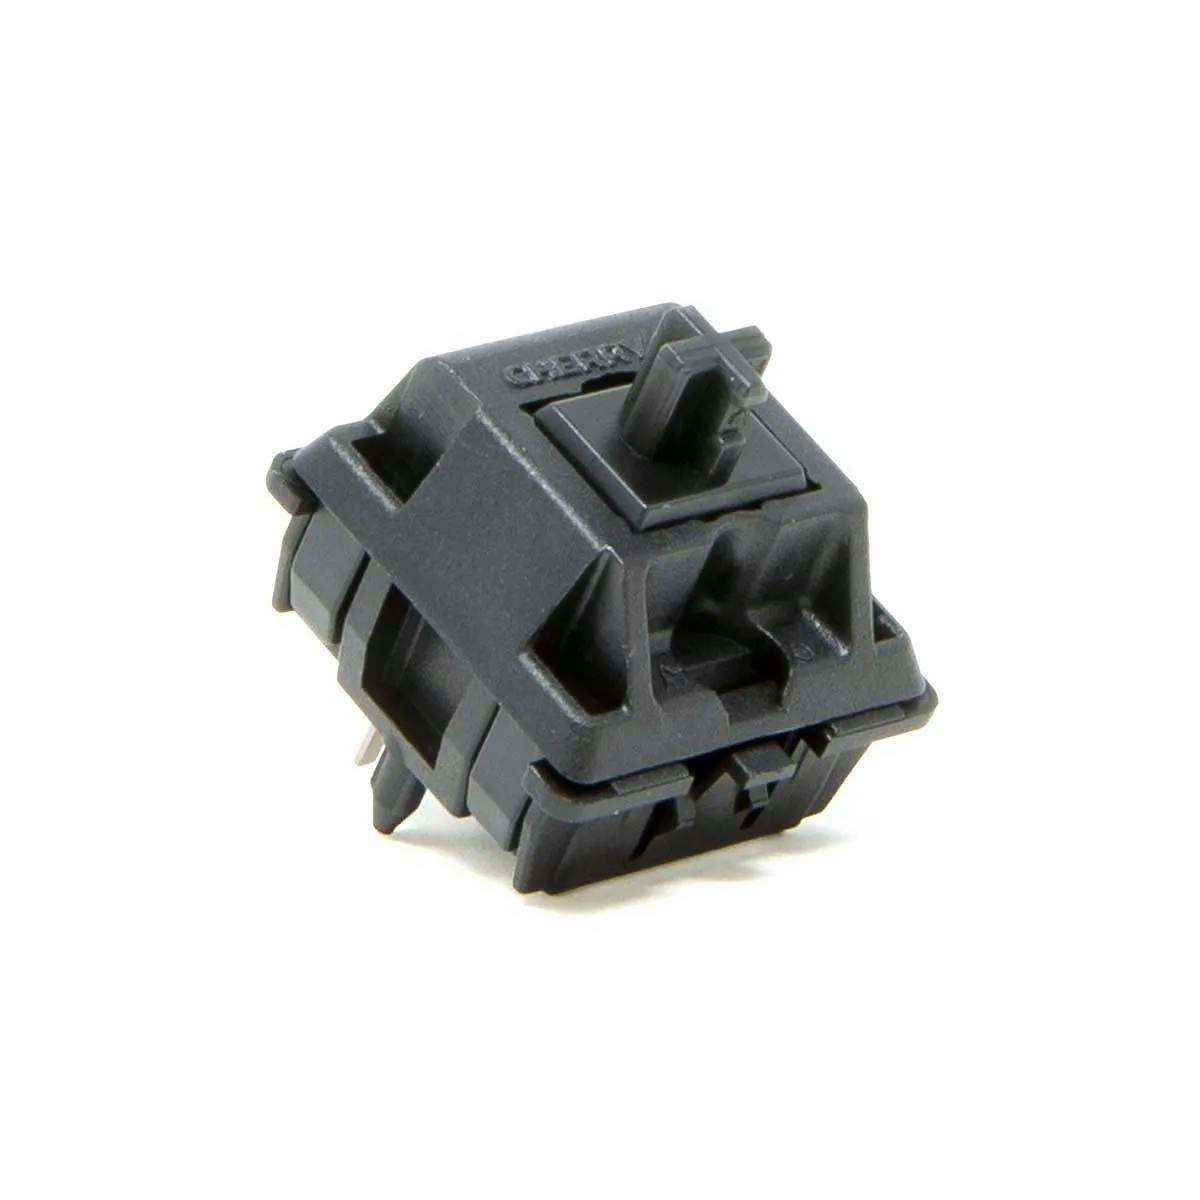 Image for Cherry MX Hyperglide PCB Mount Switches